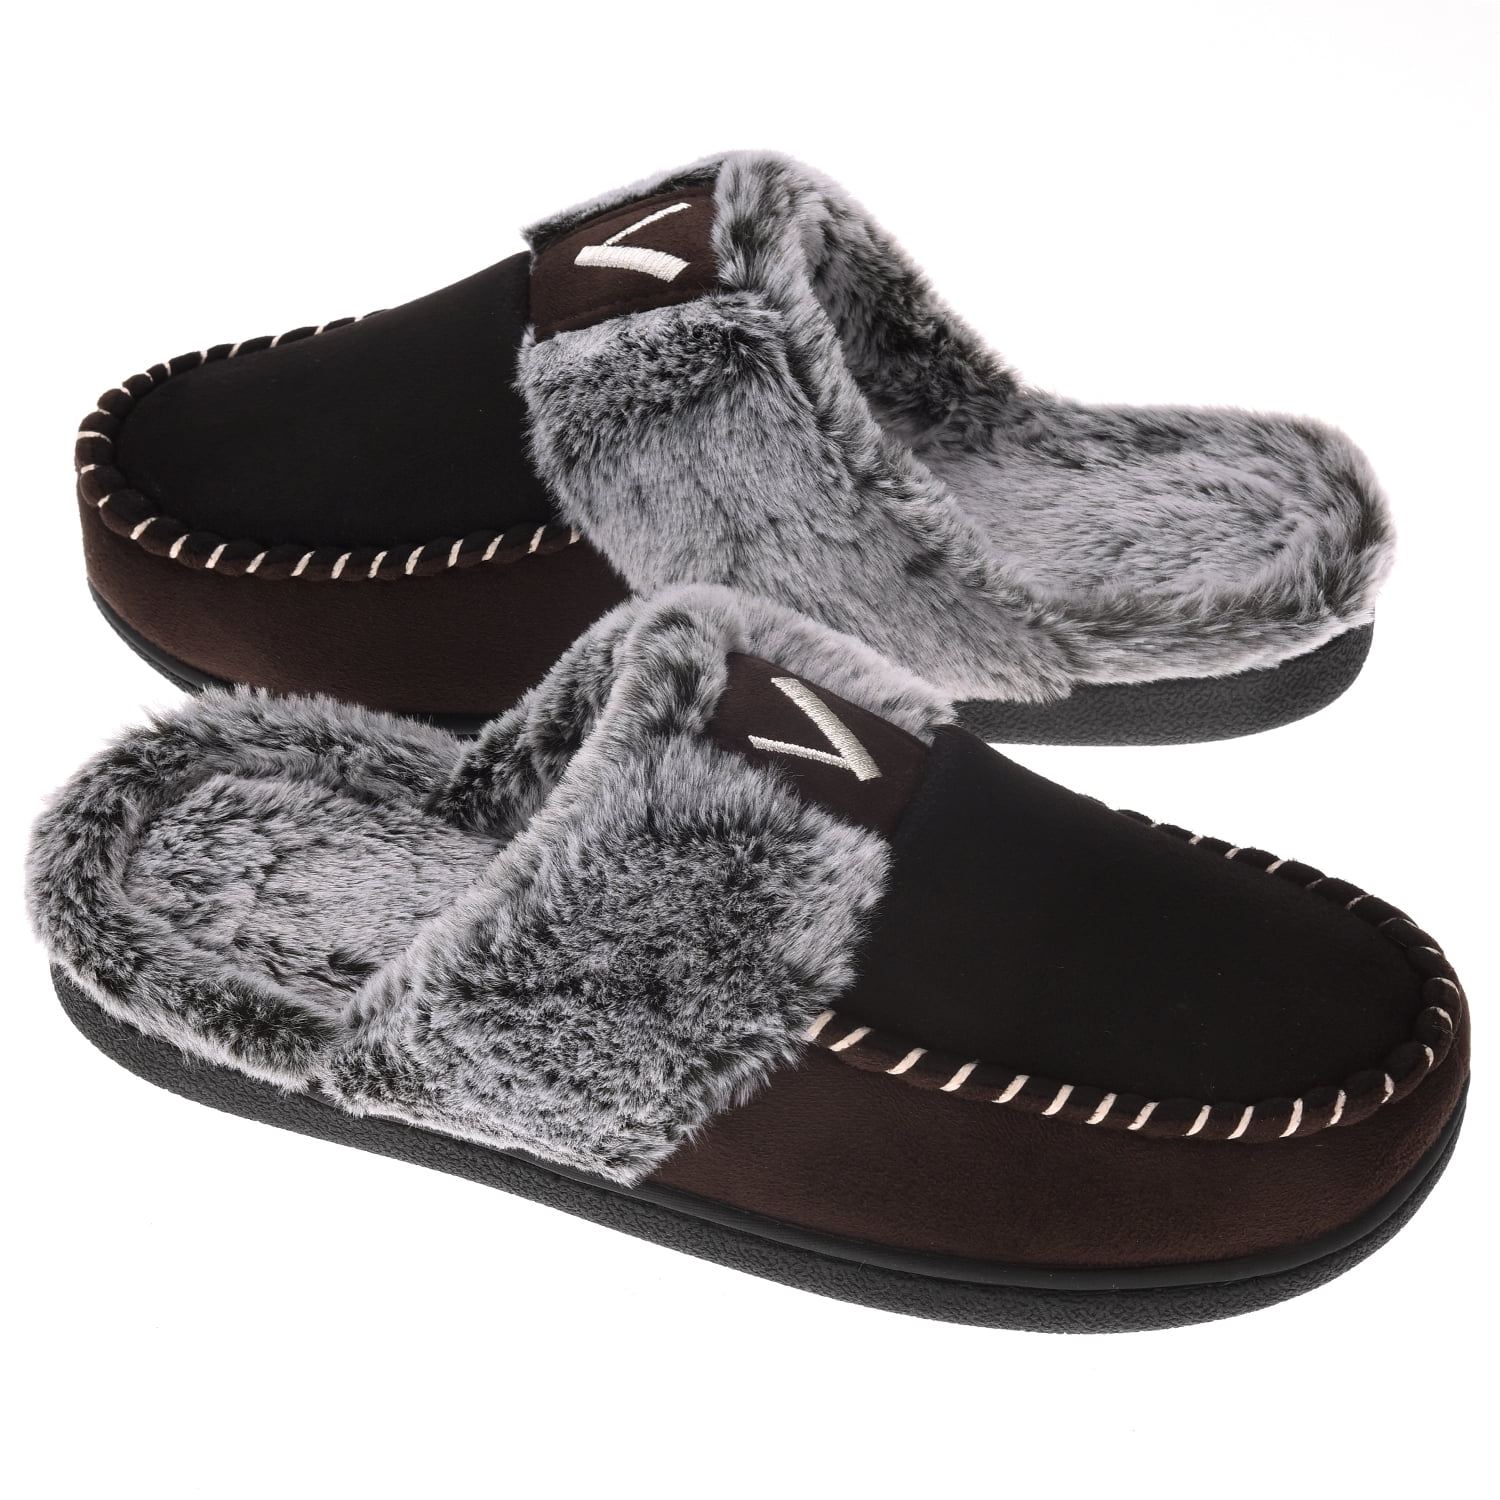 Unisex Winter Slippers Indoor Outdoor Mules Plush Lined Warm Fuffly House Shoes 